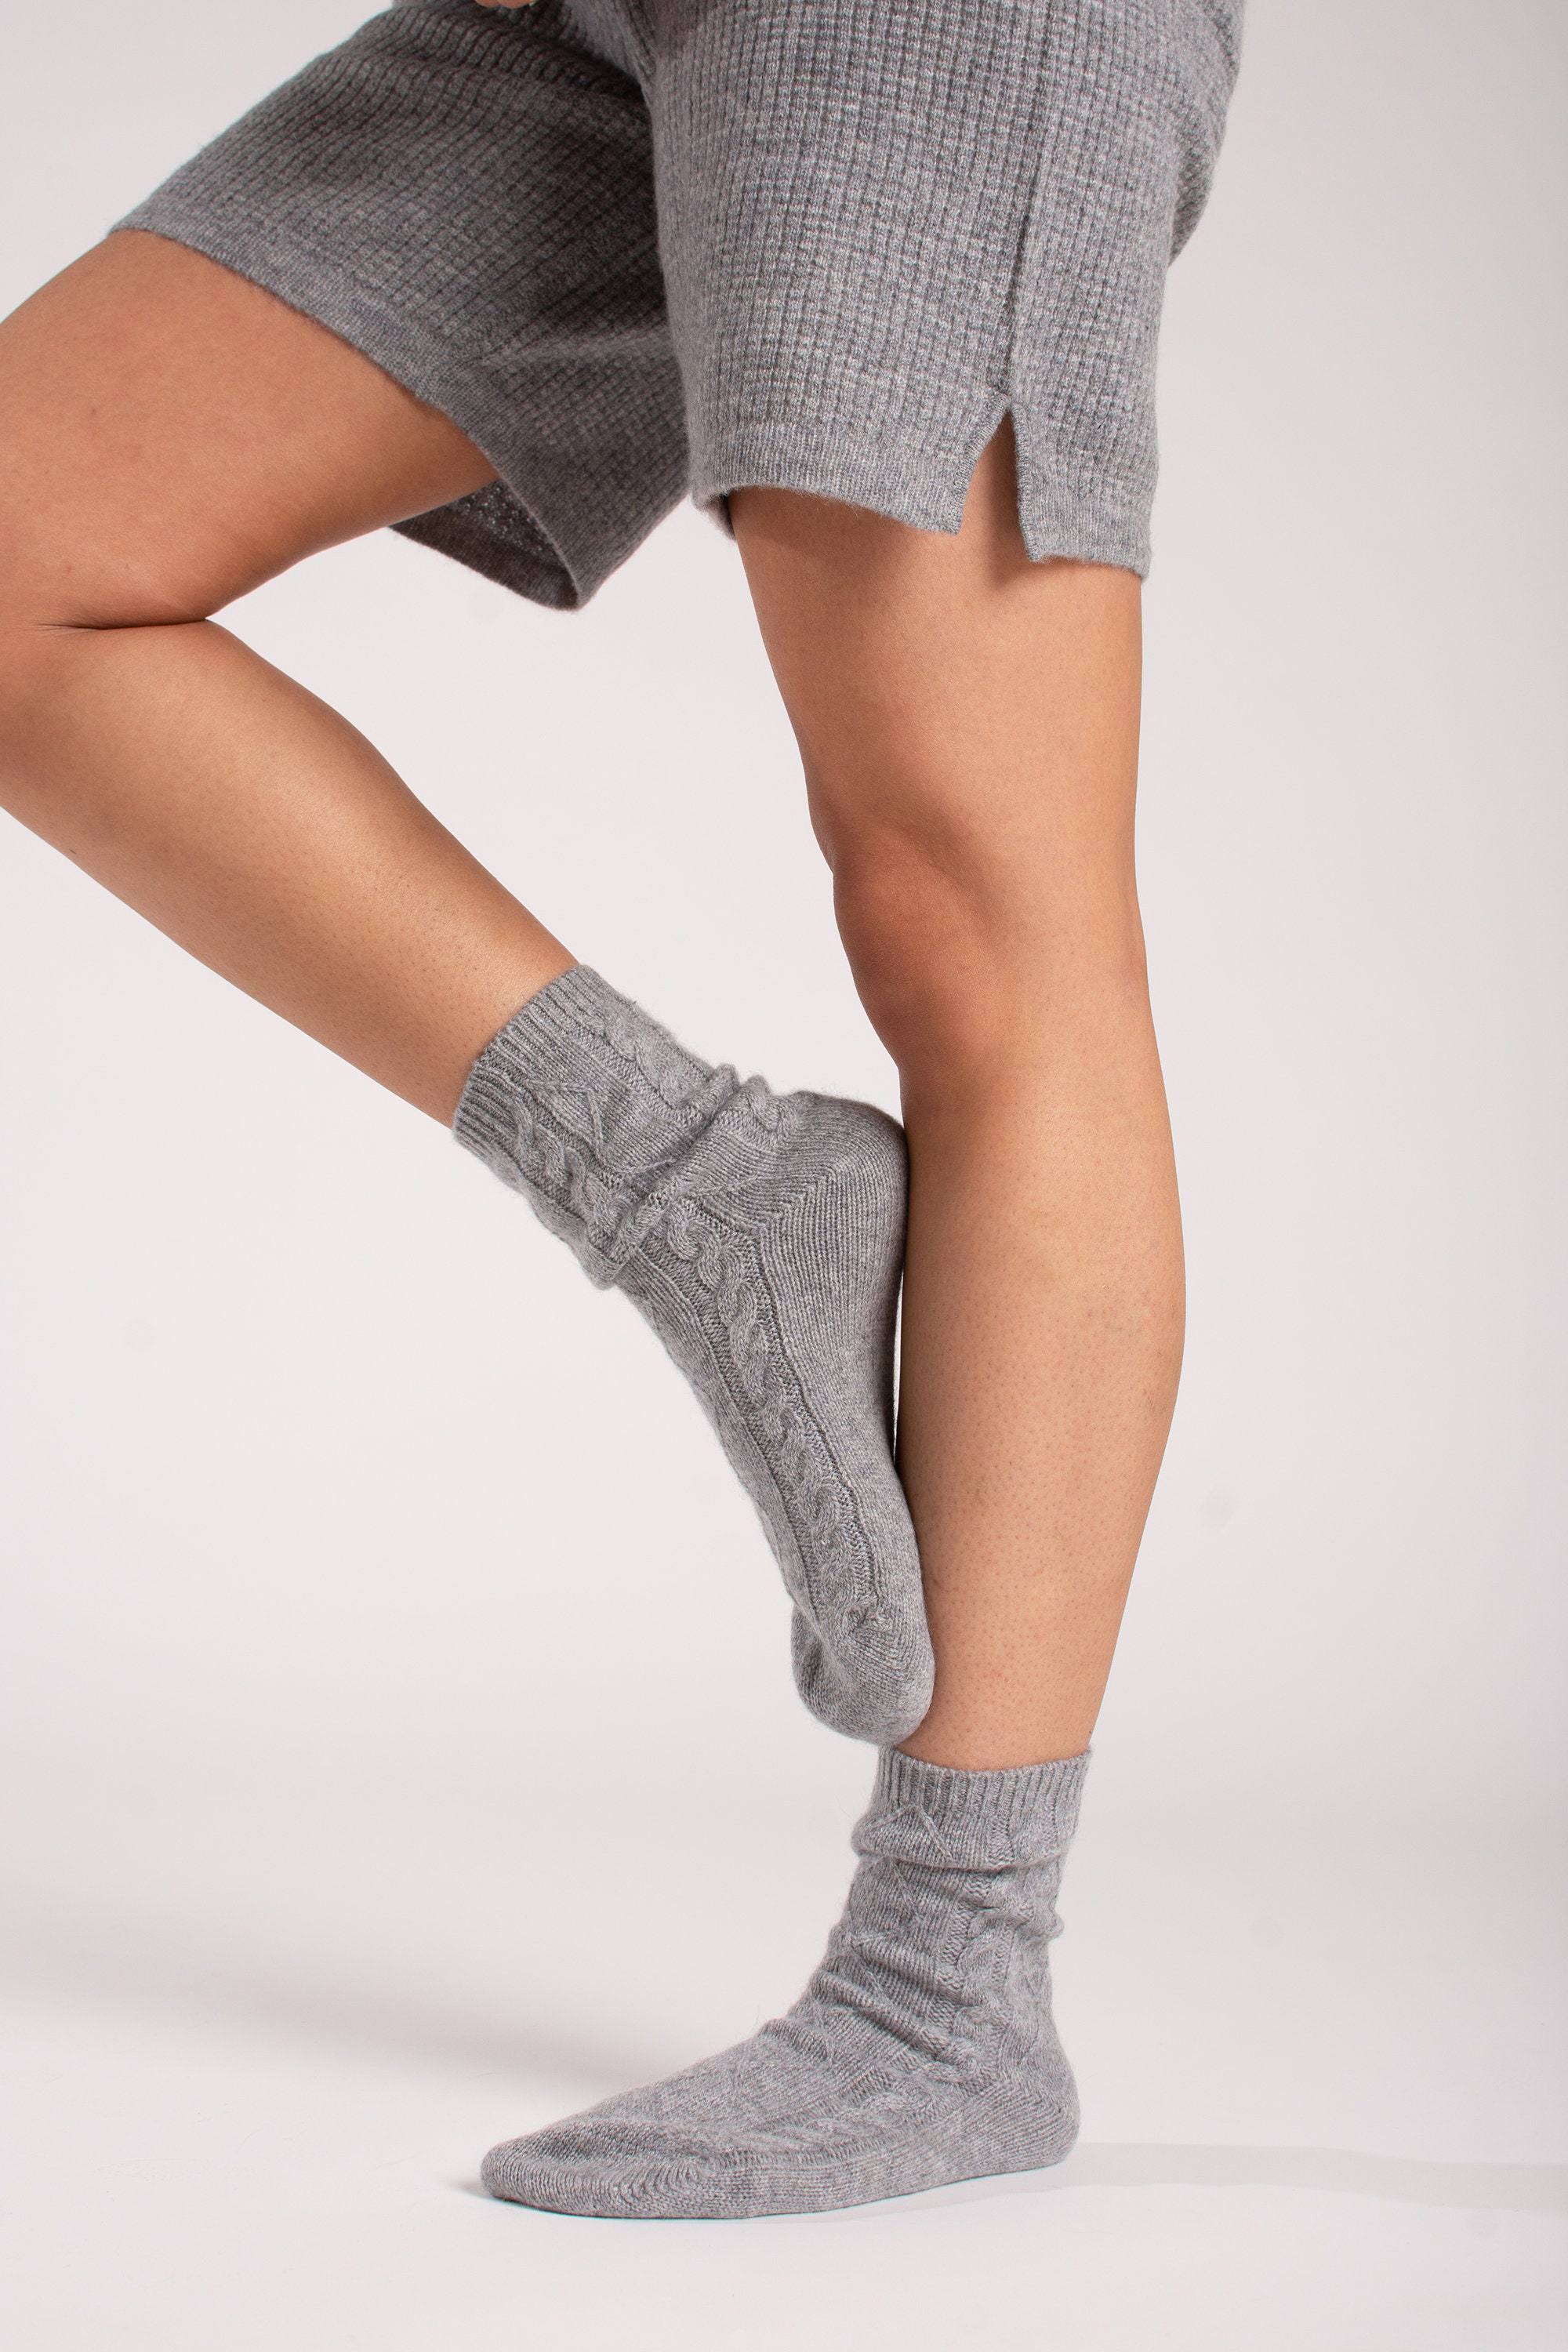 Cozy 100% Cashmere Cable Knit Socks Made in USA 